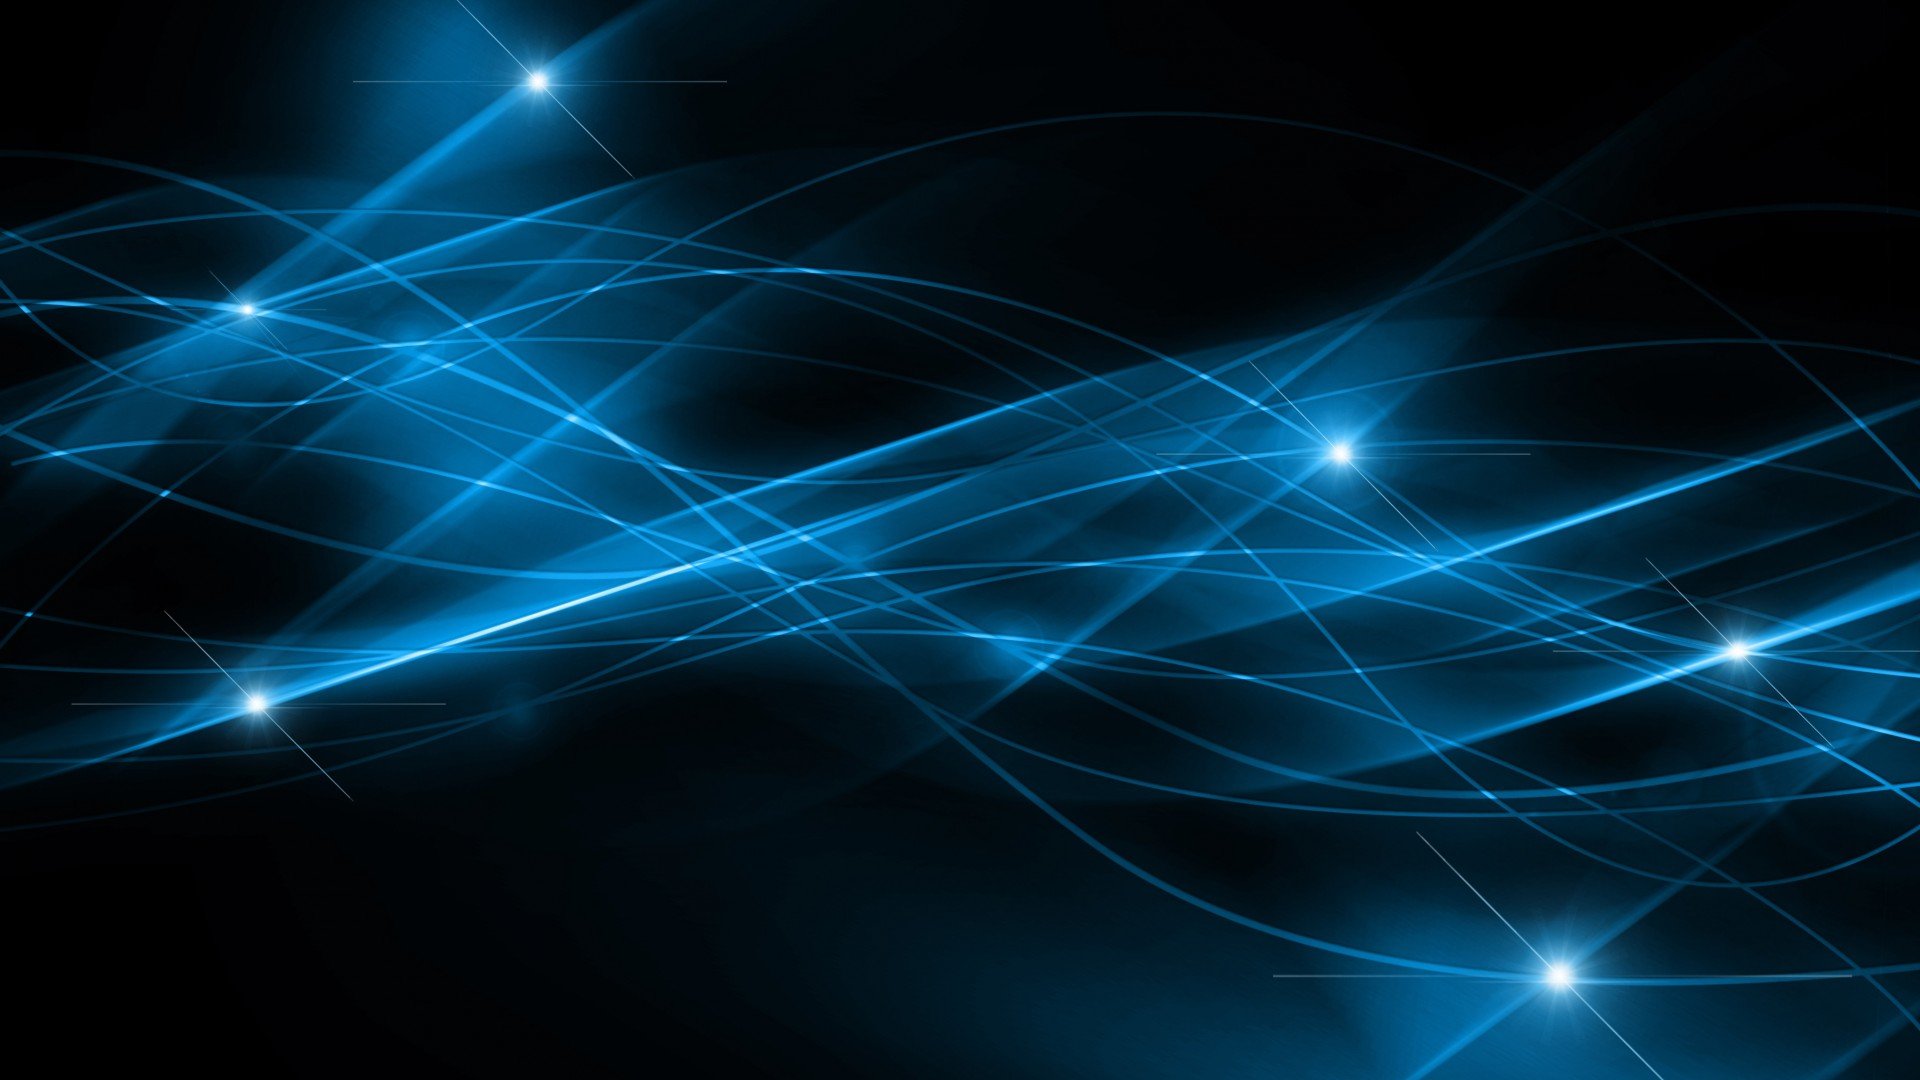 Black And Blue Abstract Backgrounds Hd 1080P HD Wallpapers